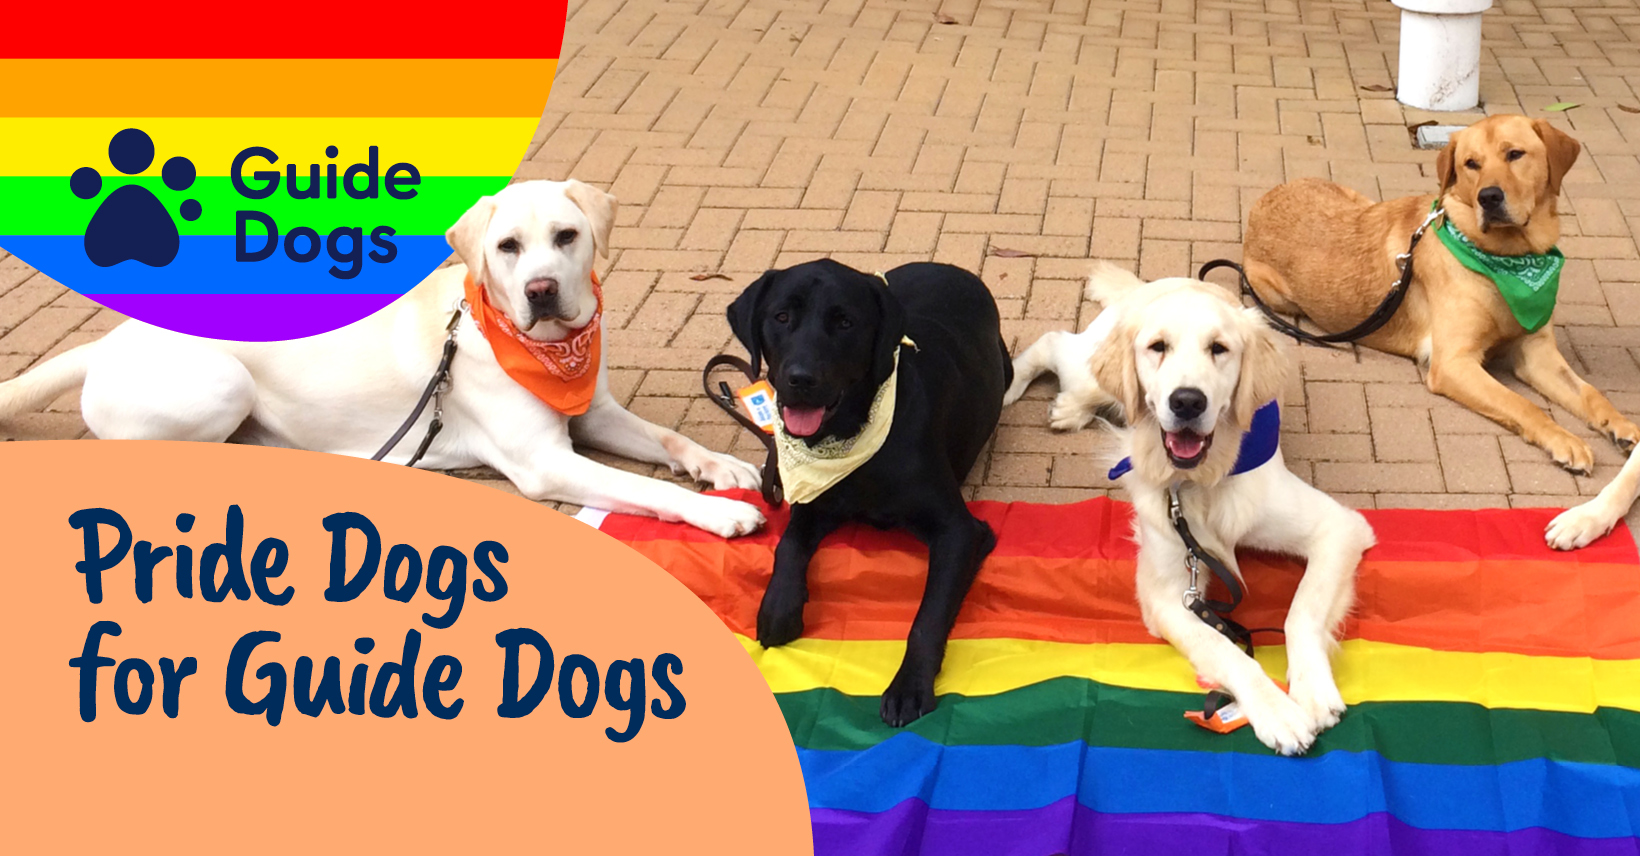 Dogs show support for LGBT community with virtual #Pride parade